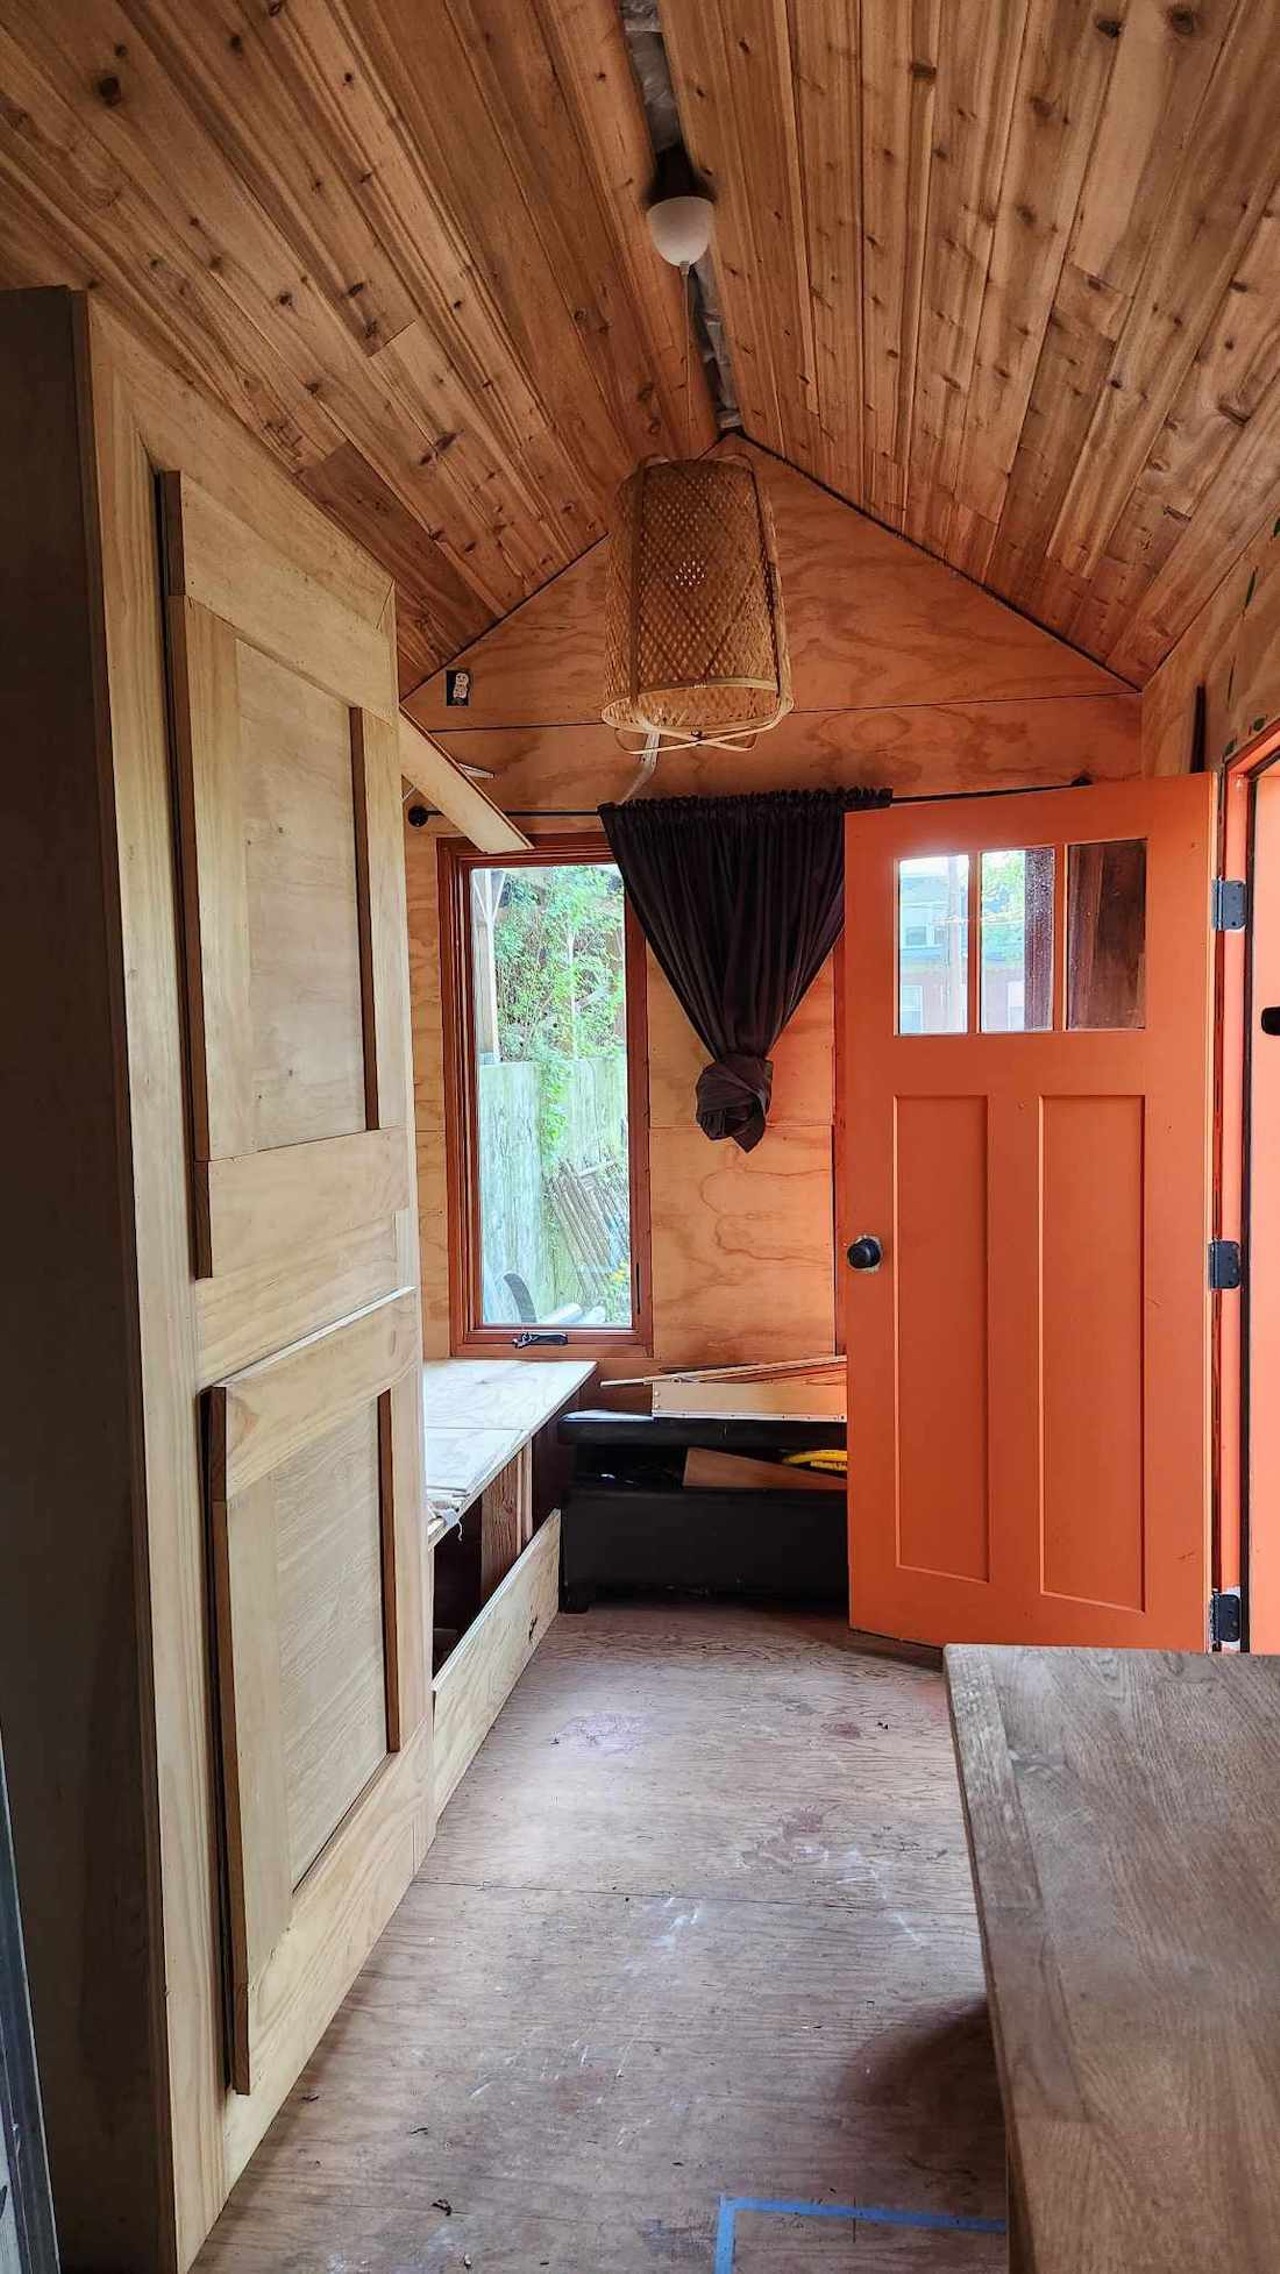 An interior shot of the tiny house.